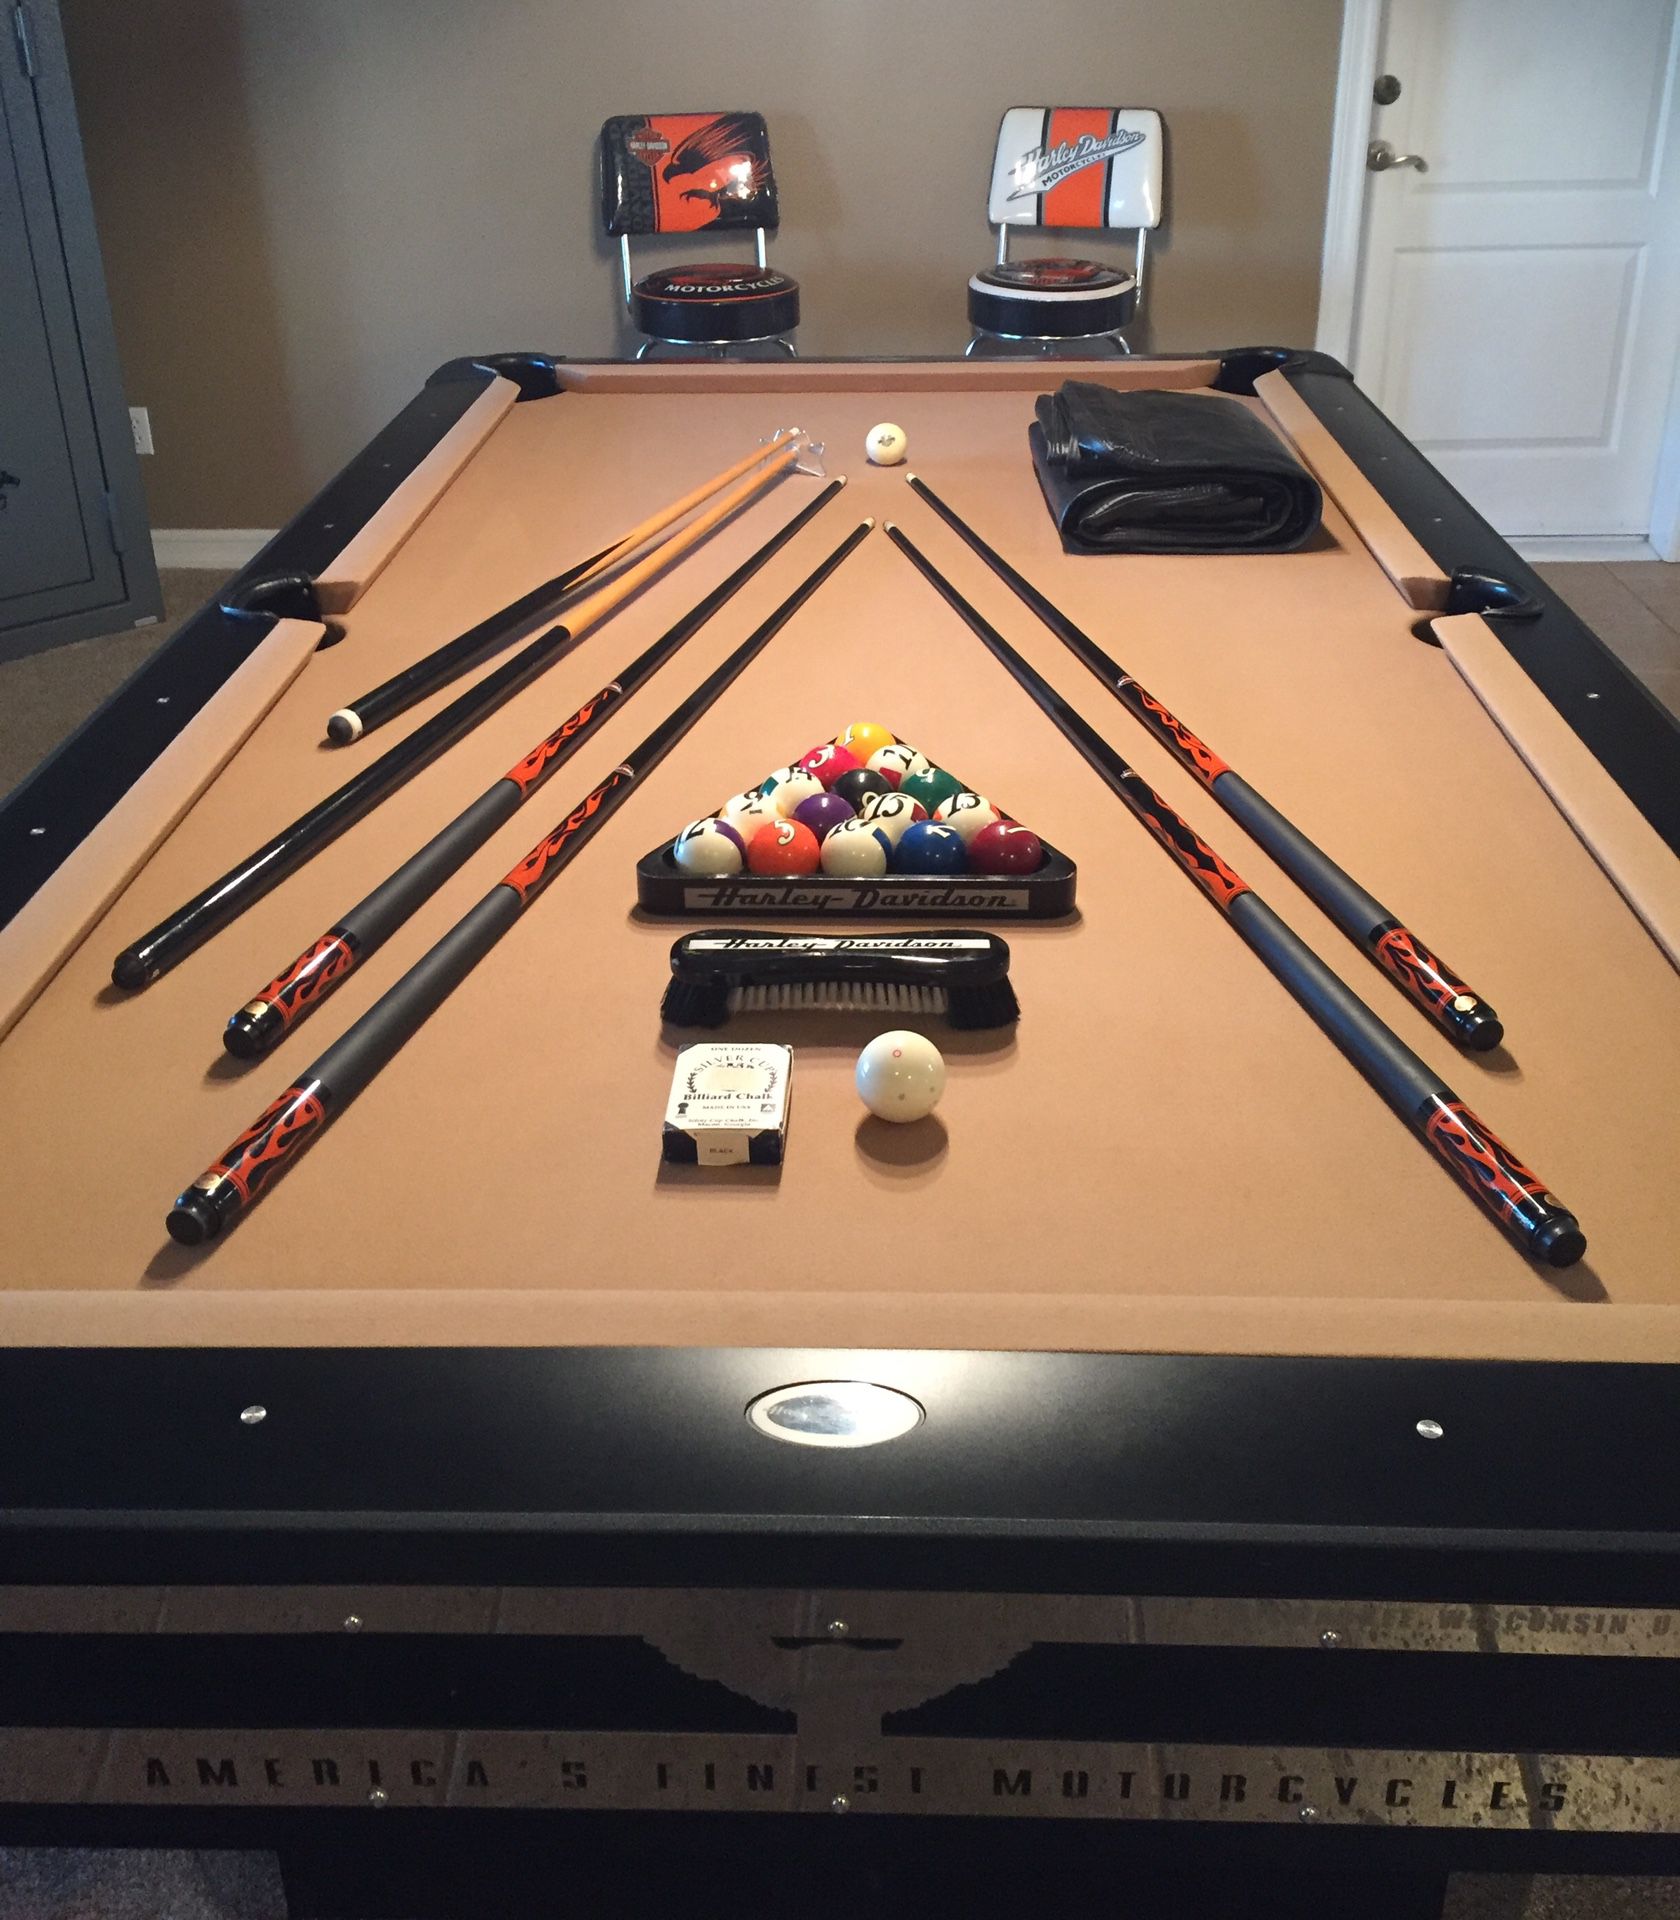 8’ pool table with matching light and pool sticks